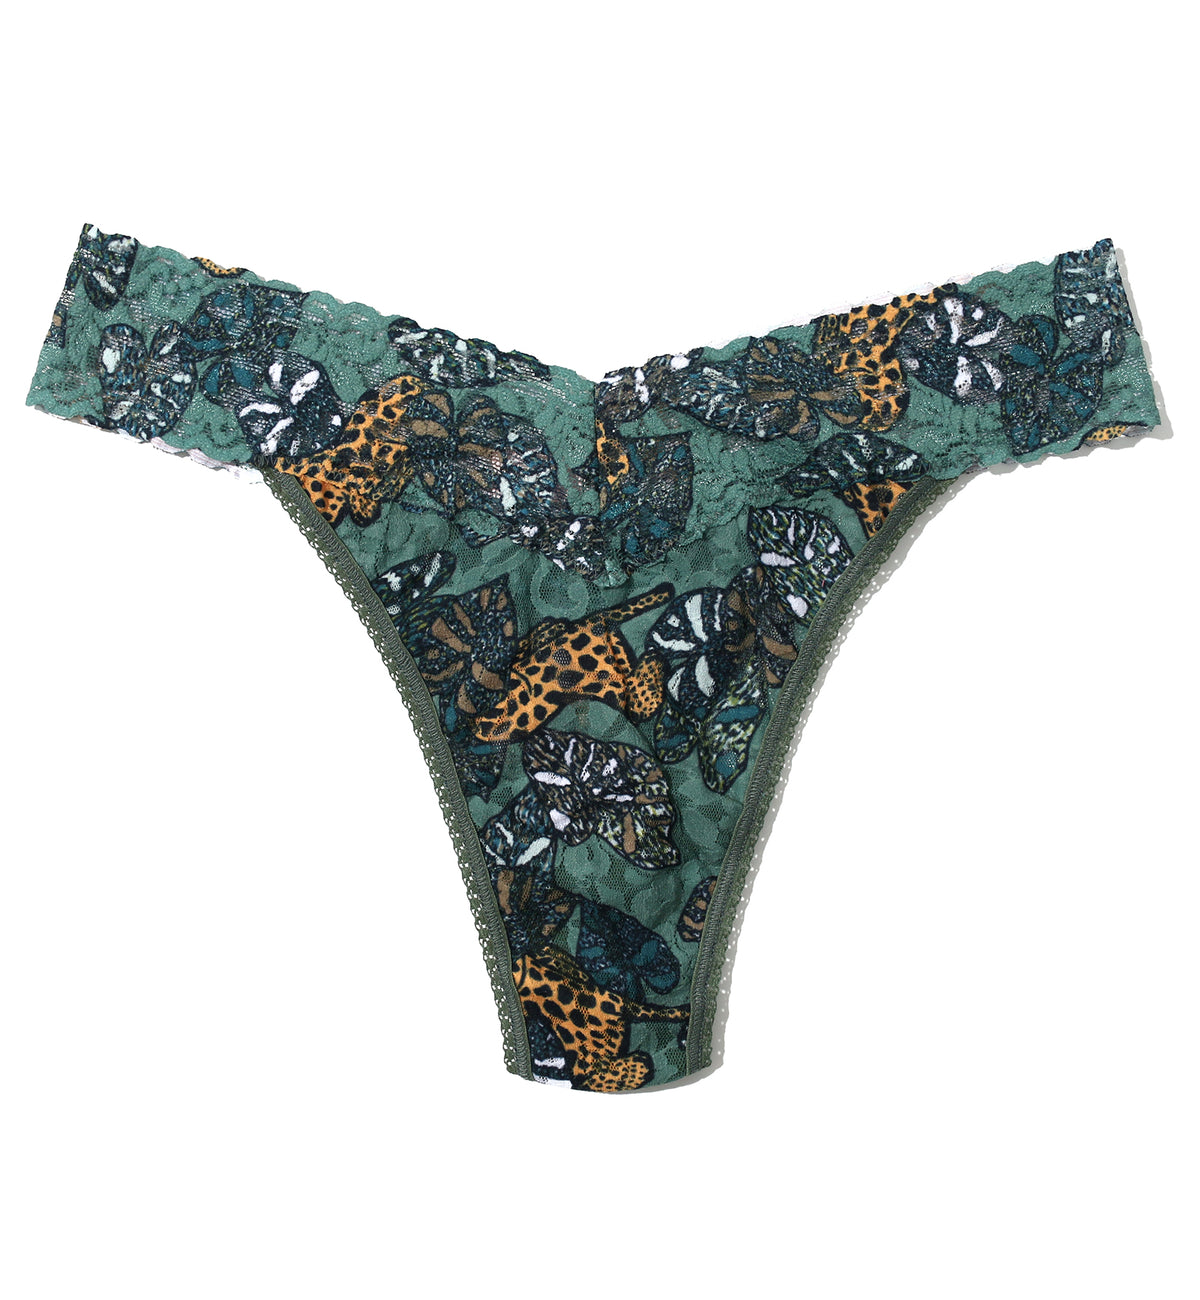 Hanky Panky Signature Lace Printed Original Rise Thong (PR4811P),Prowling - Prowling,One Size